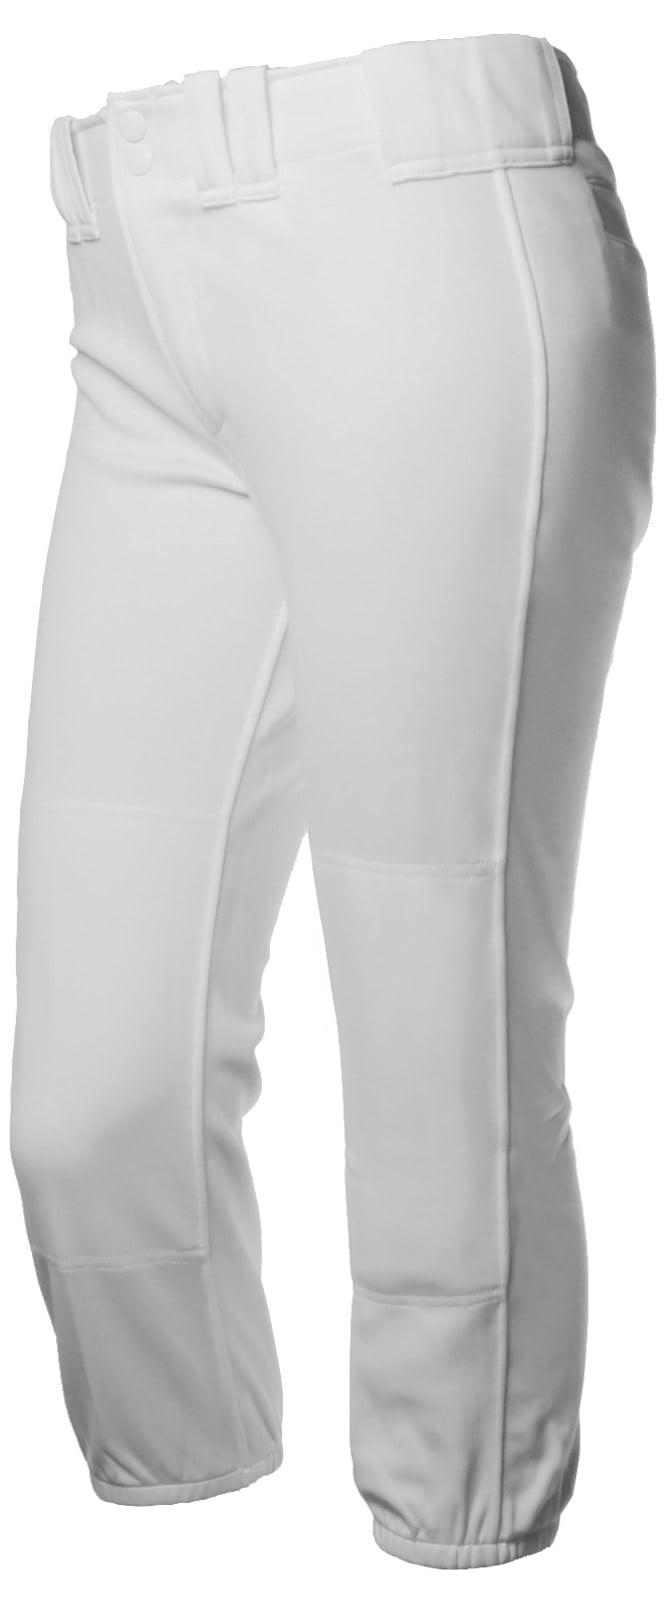 Navy Rip-It Classic Fastpitch Softball Pant Youth